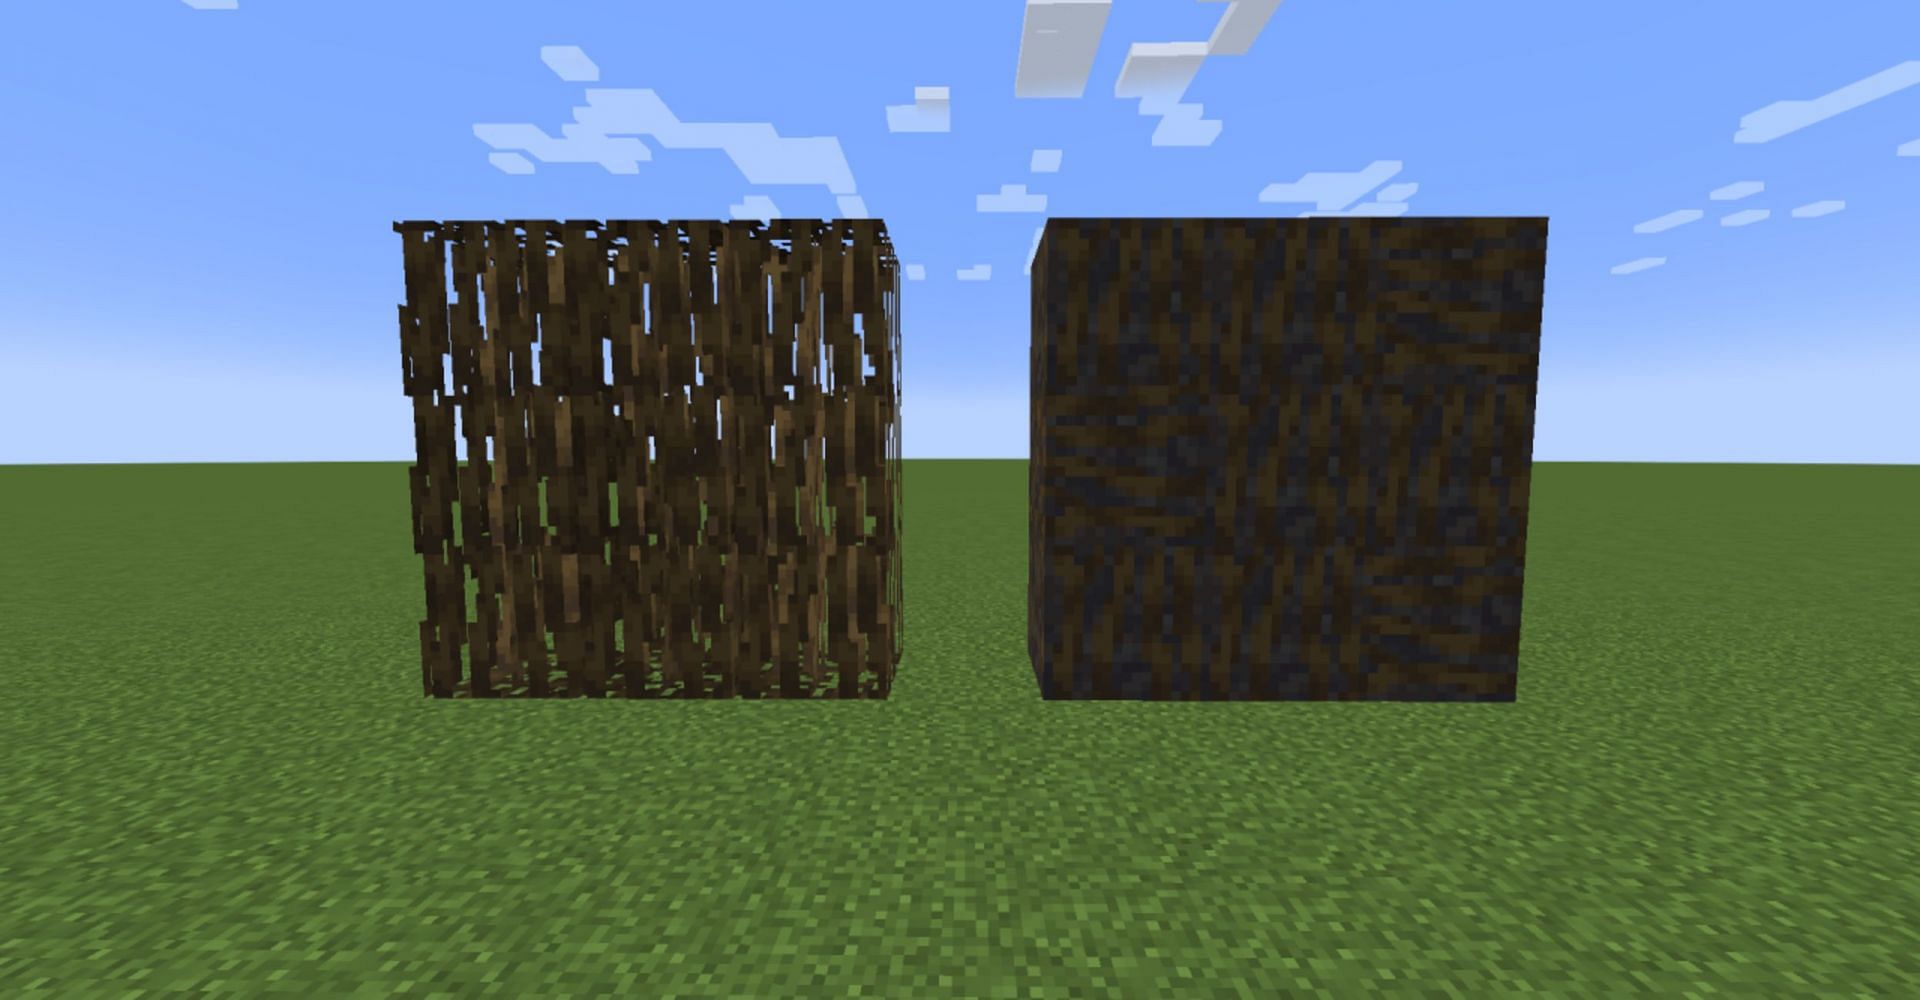 Mangrove roots (left) and muddy mangrove roots (right) (Image via Minecraft Build Inspiration/tumblr)